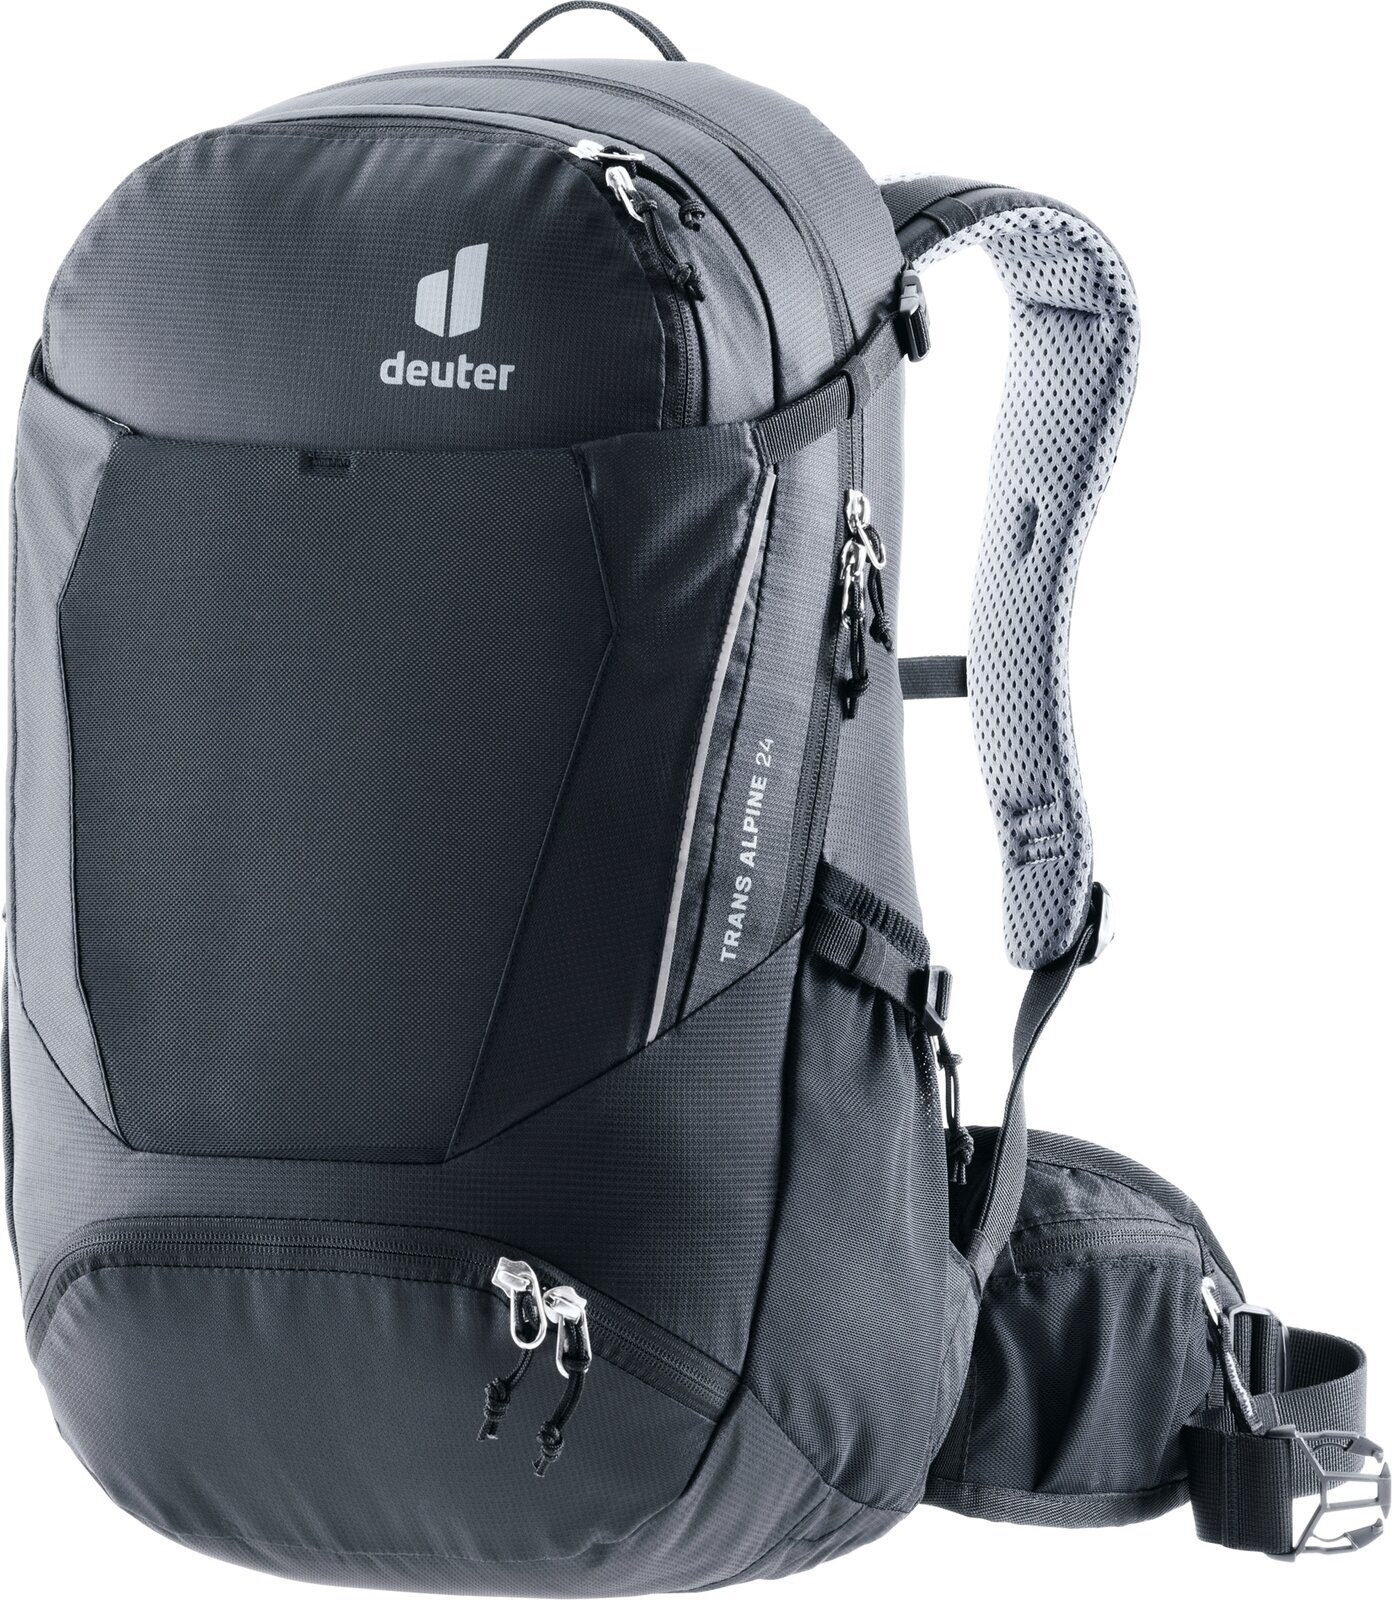 Cycling backpack and accessories Deuter Trans Alpine 24 Black Backpack